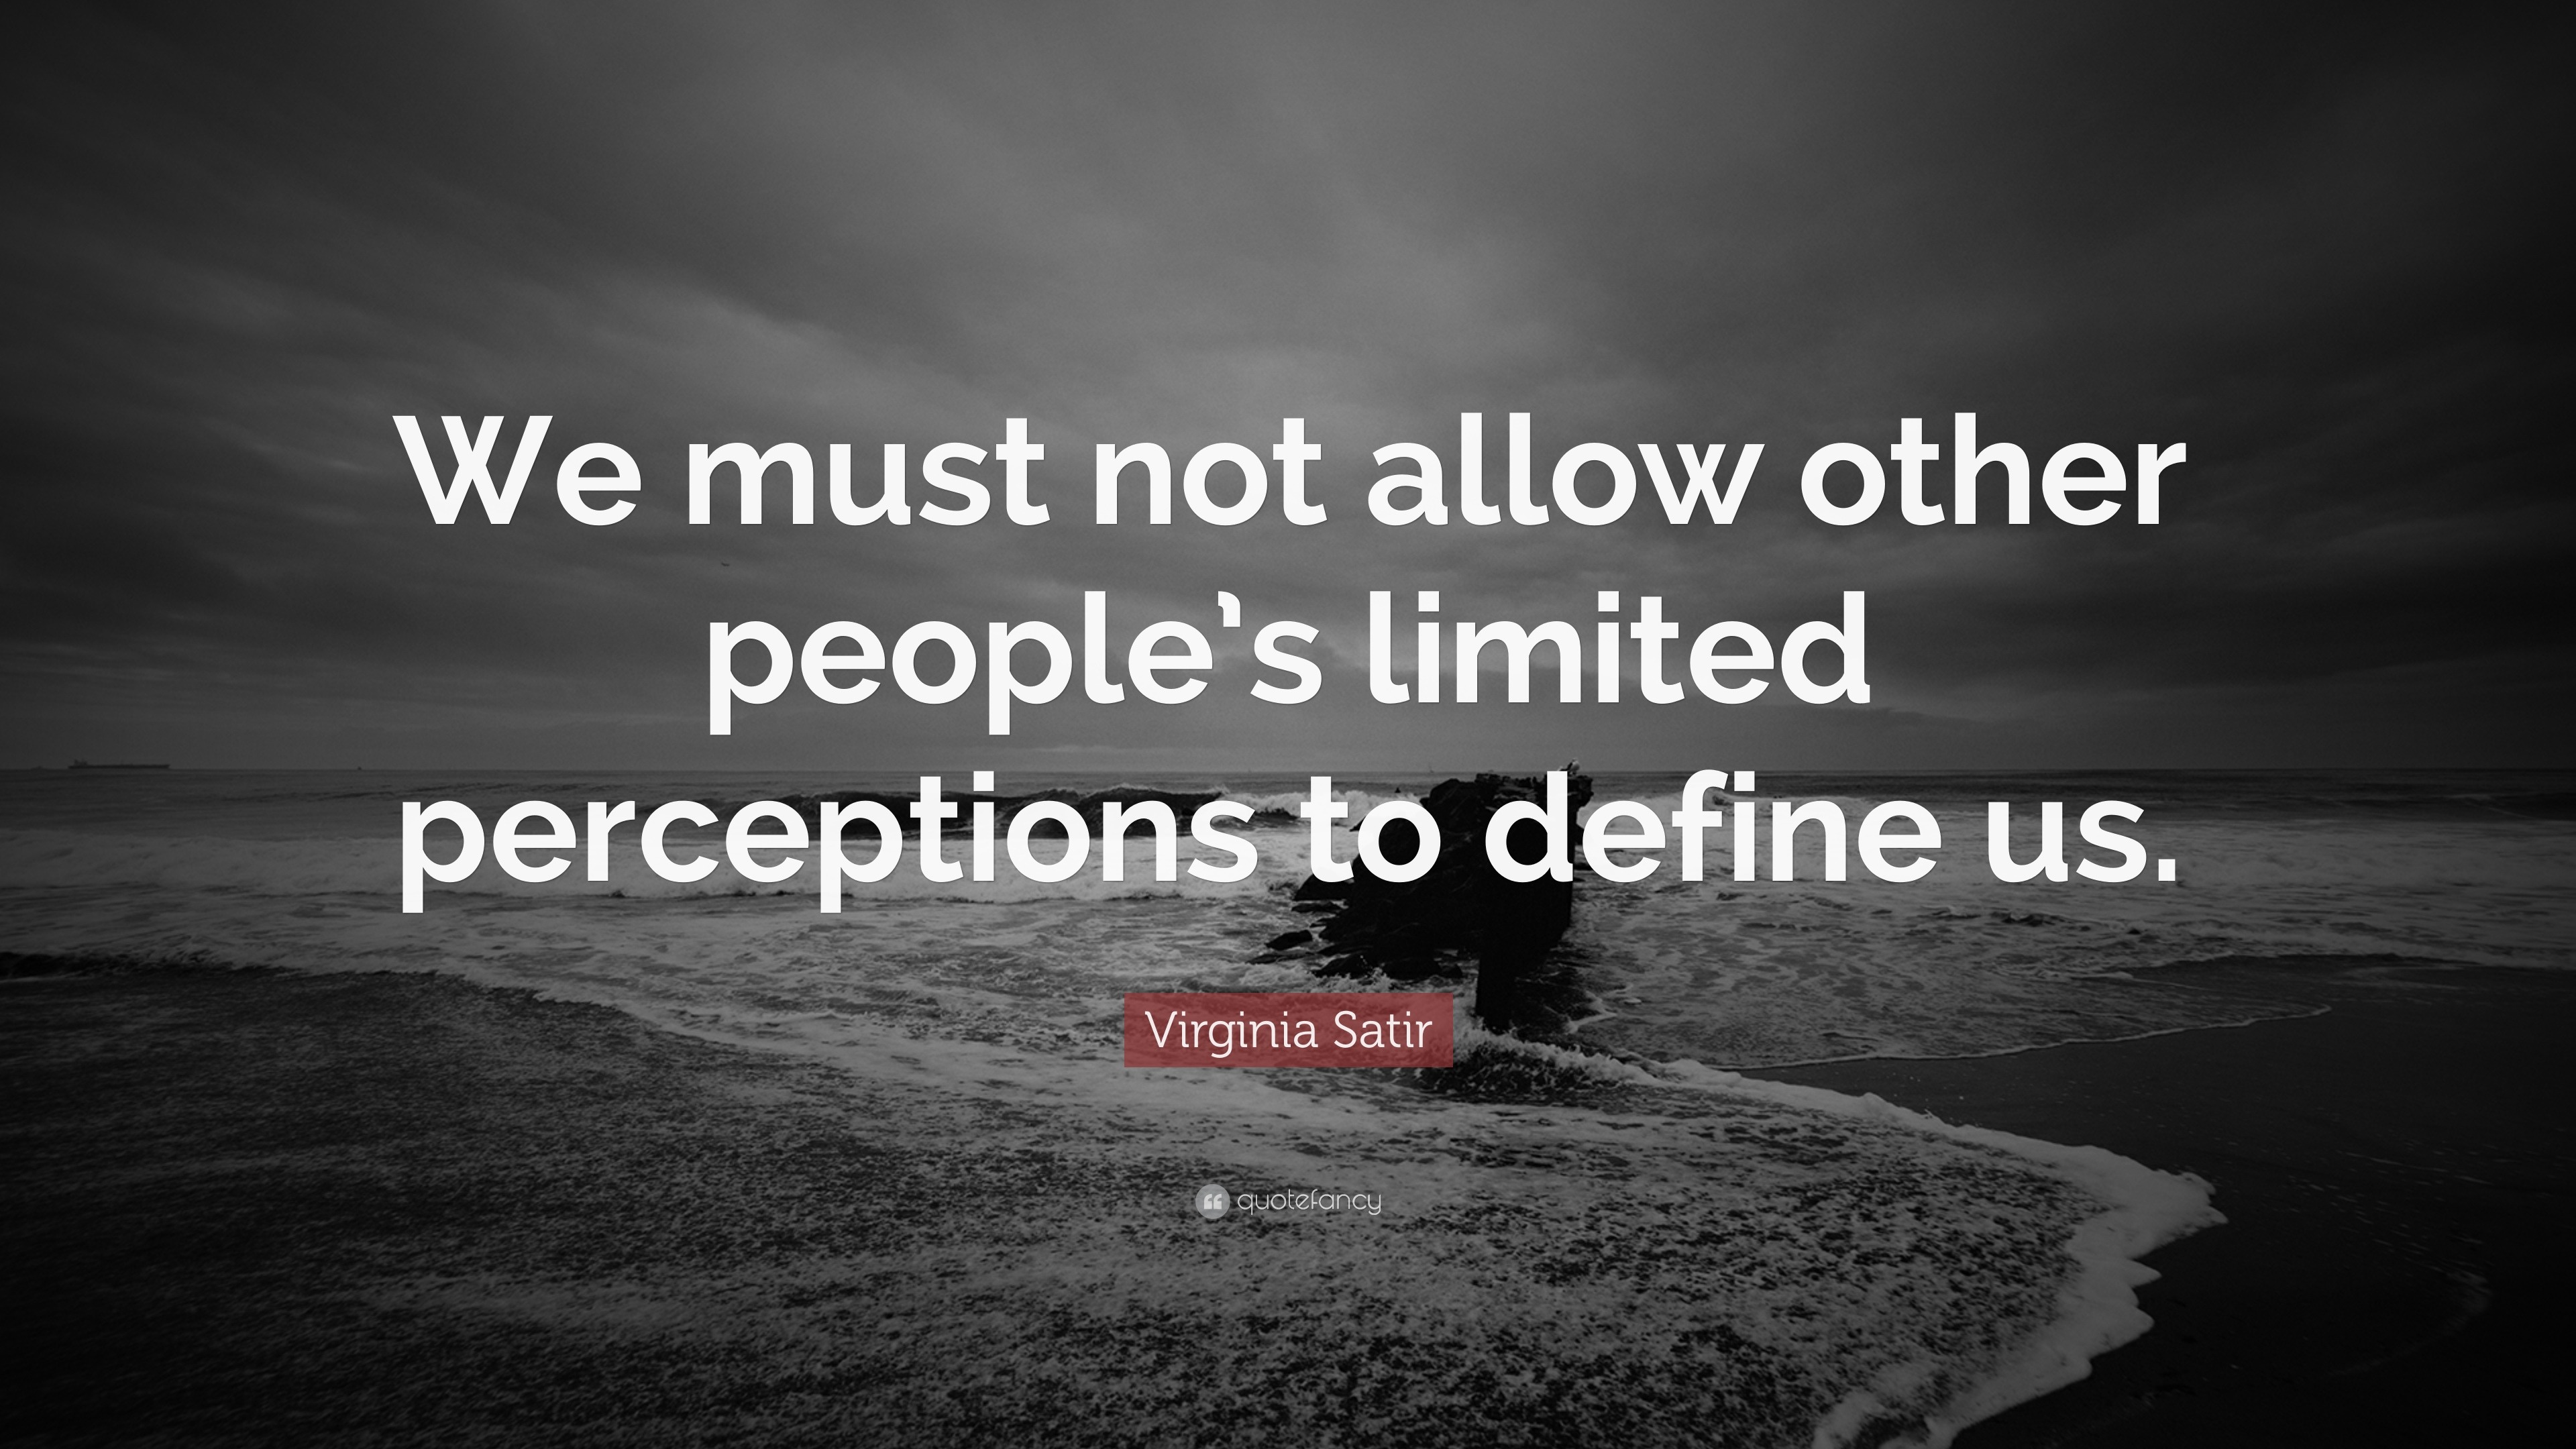 Virginia Satir Quote: “We must not allow other people’s limited